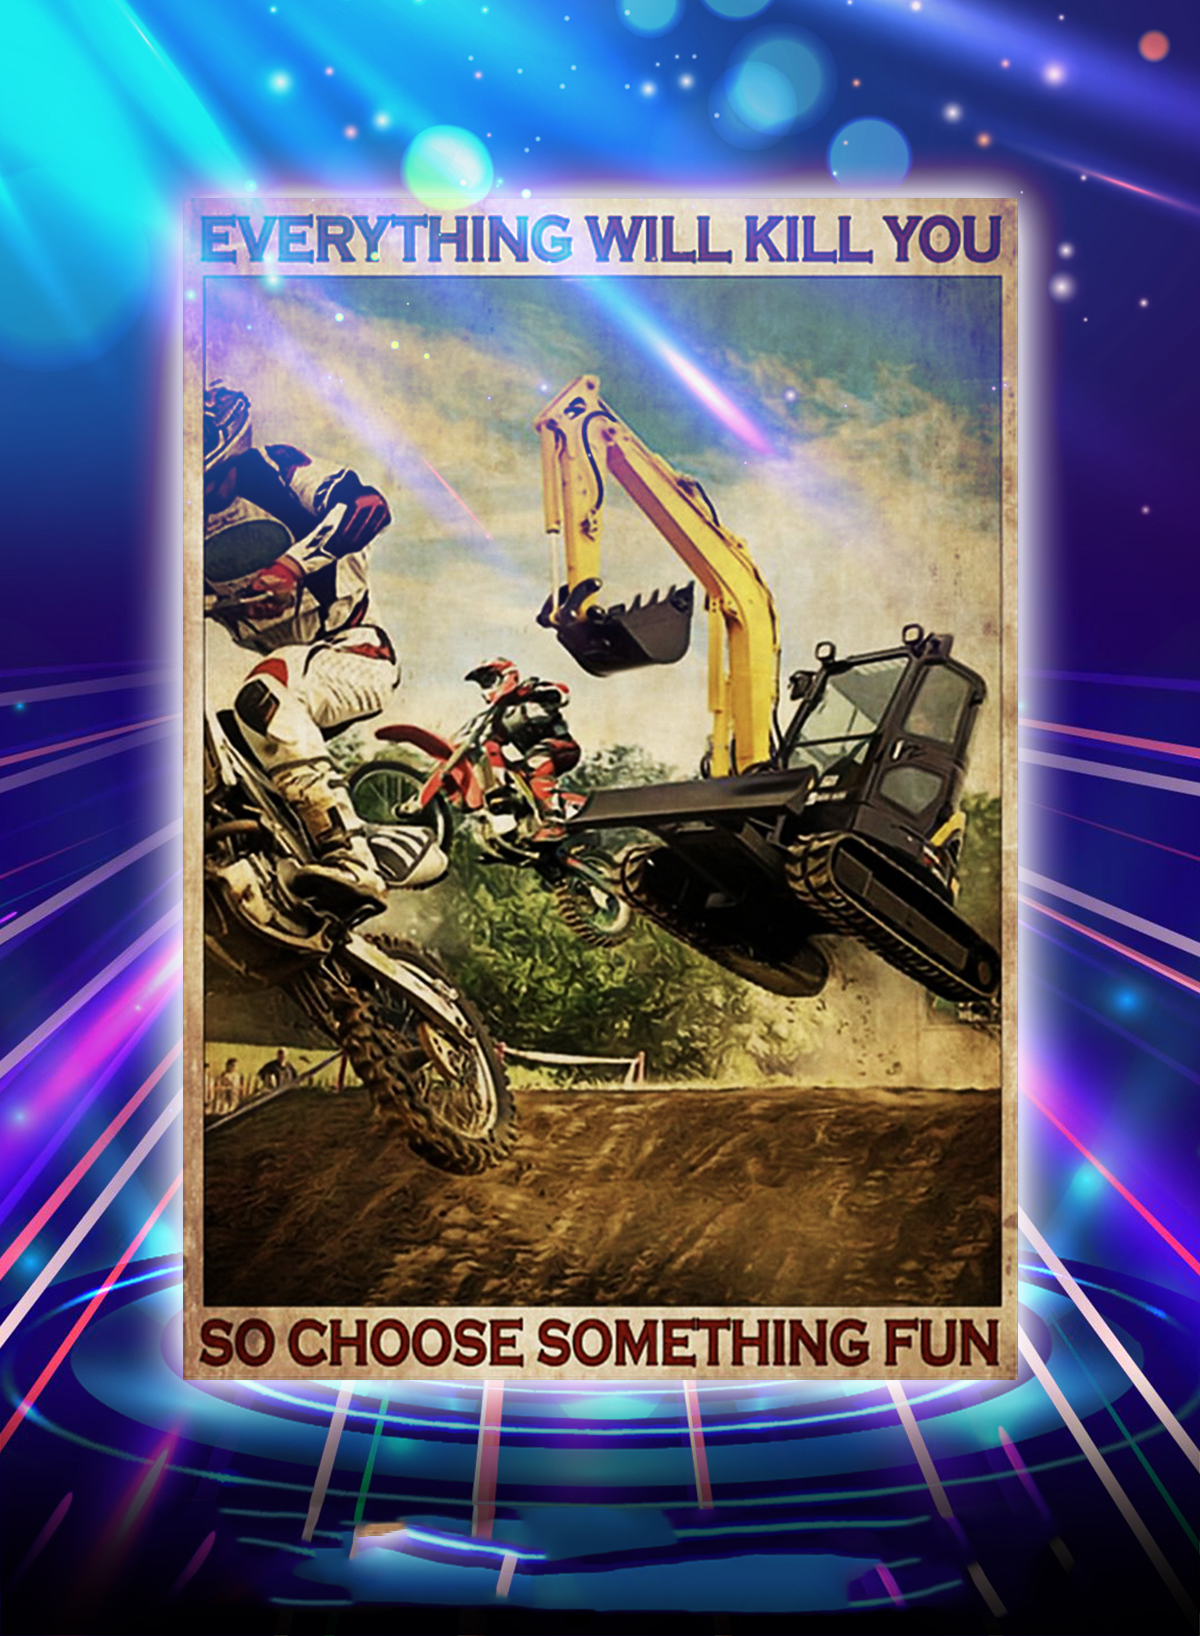 Motocross and excavator everything will kill you so choose something fun poster - A1